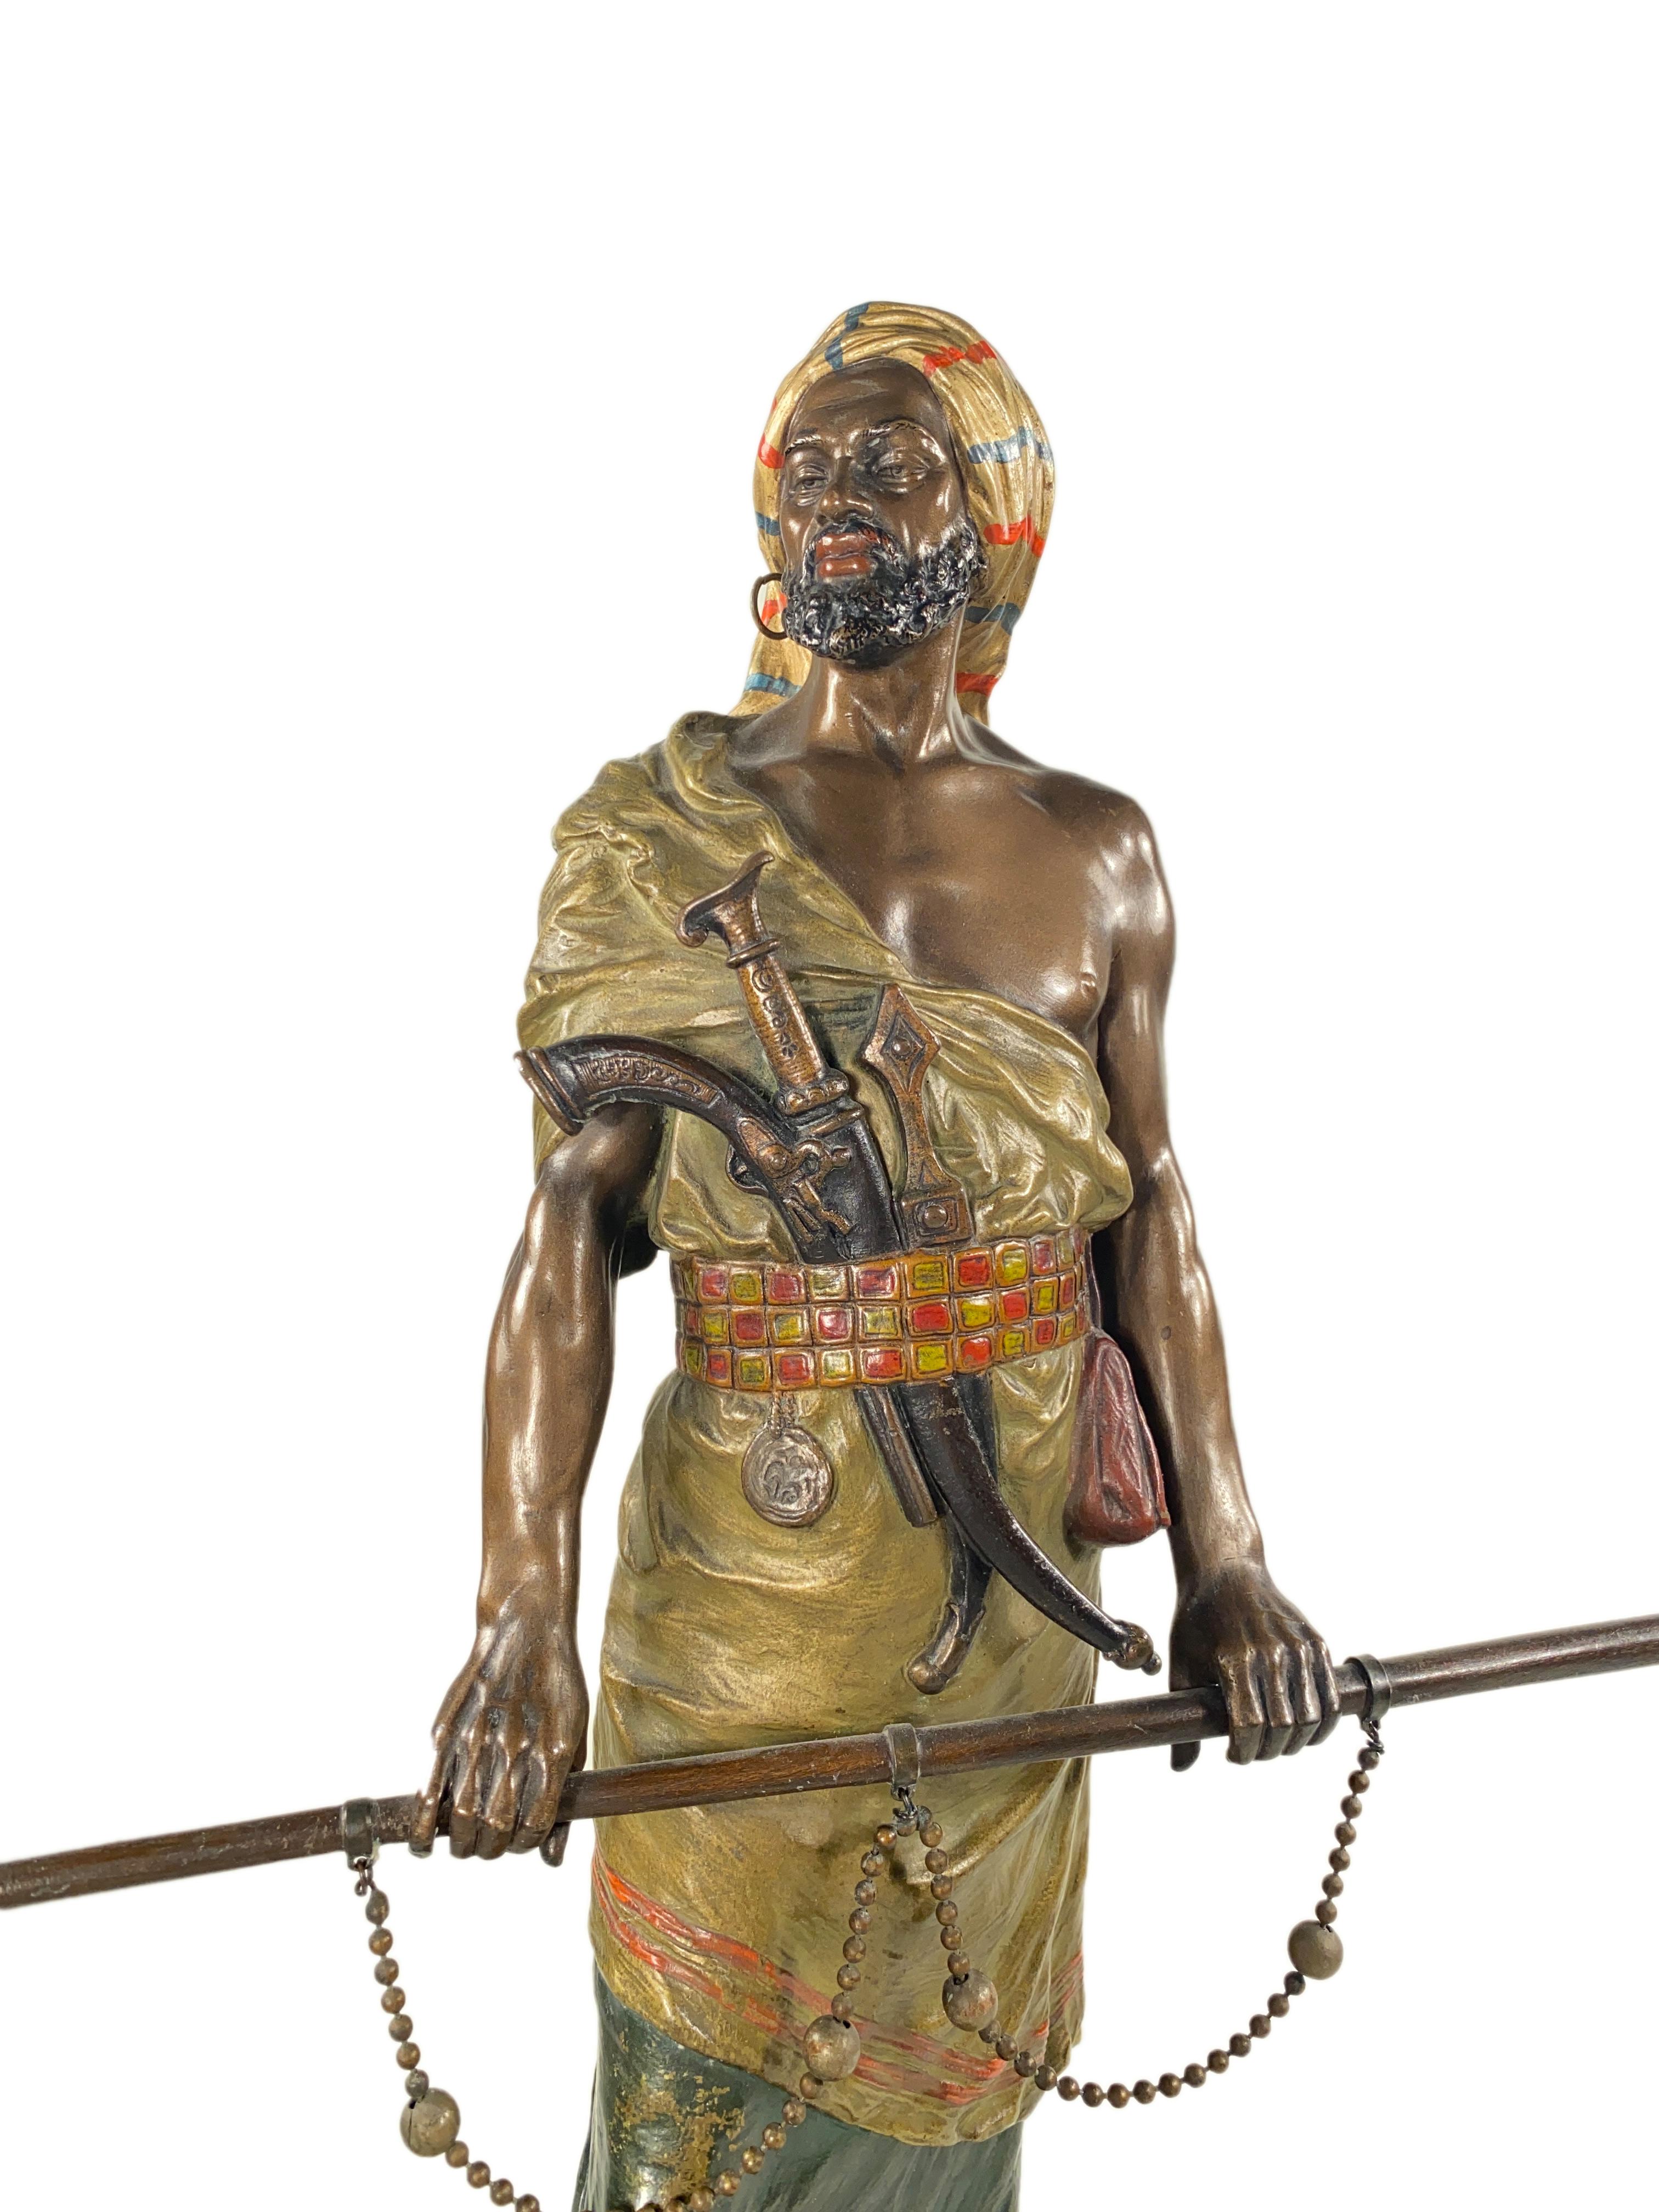 An Austrian Art Nouveau bronze Orientalist sculpture of An Arab Warrior attributed and most likely made by, Franz Bergman depicting a patinated, poly-chromed and cold- painted standing Arab warrior holding a chained rod in his hands, guns, and in